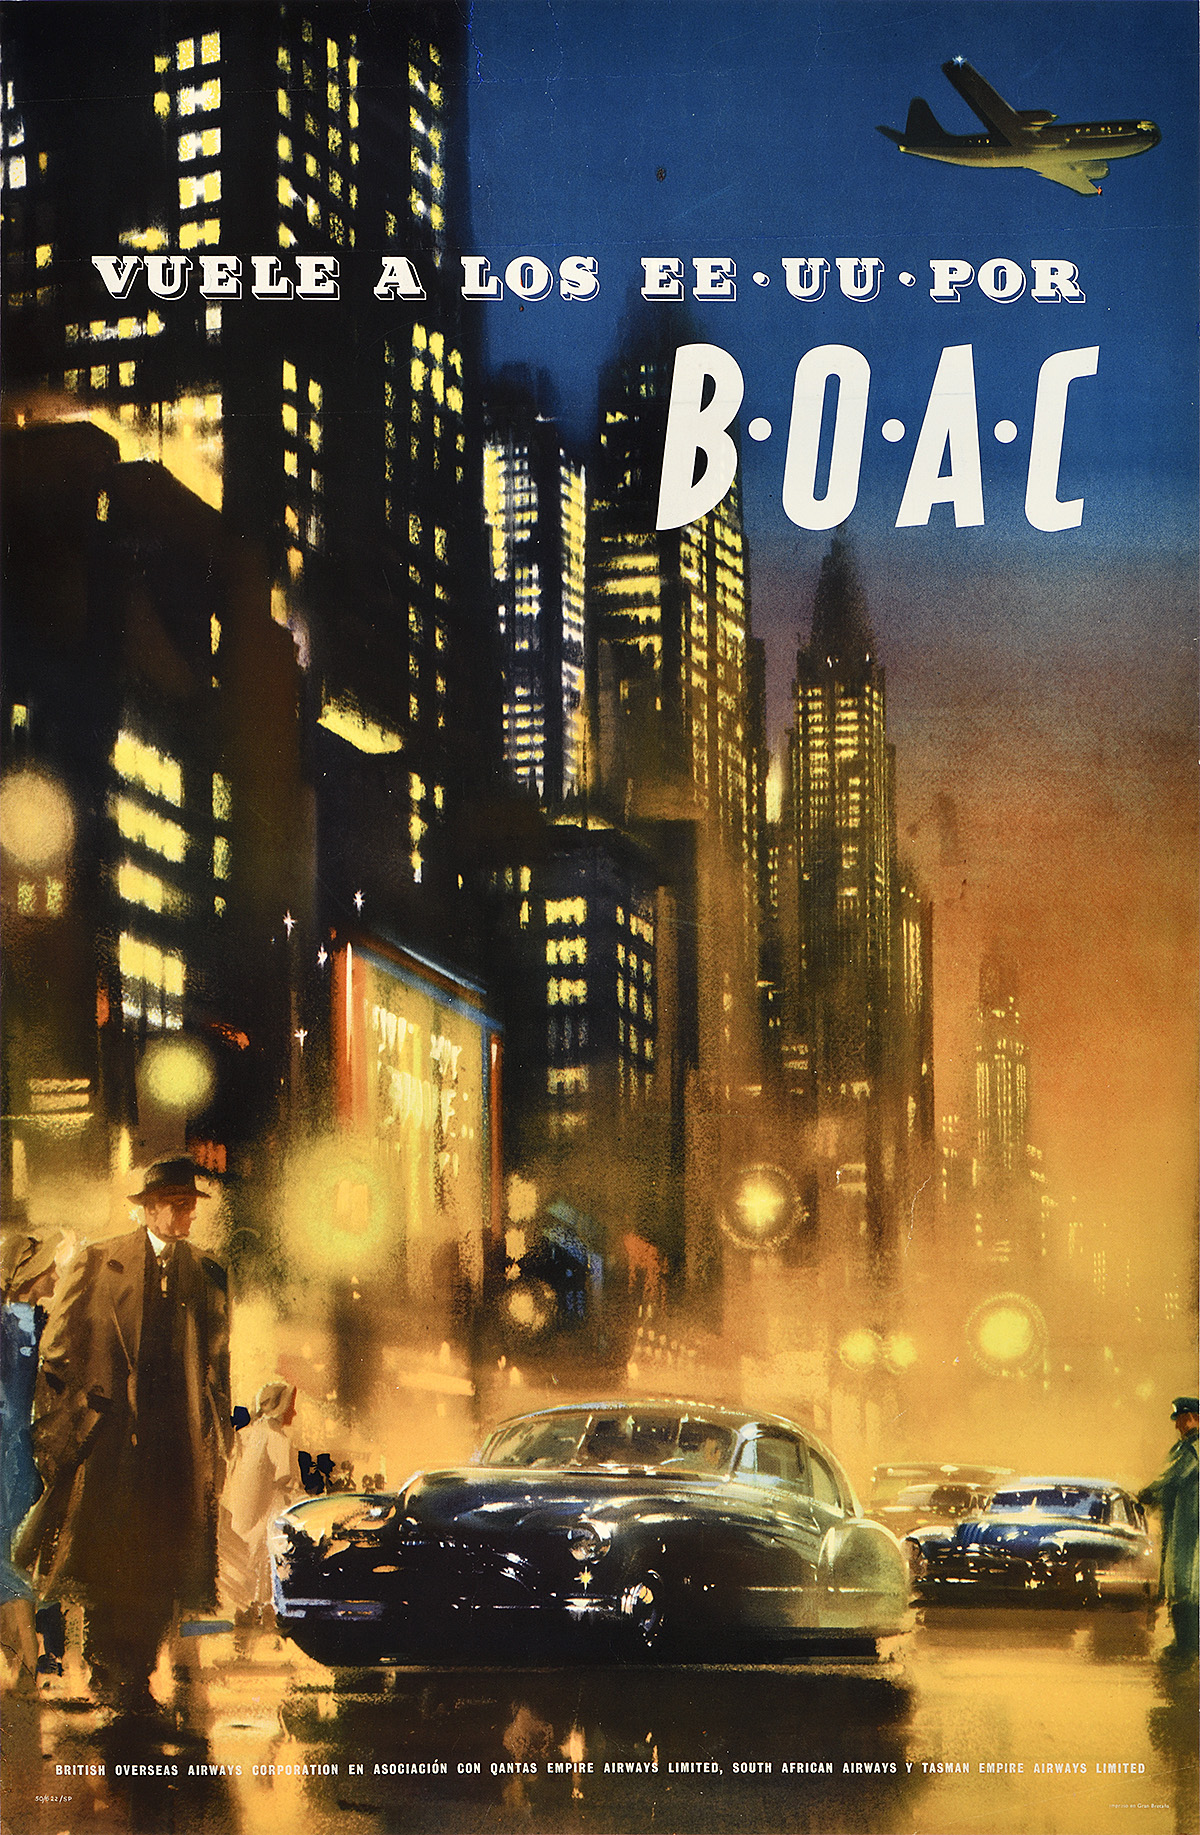 A poster of a city street on a rainy night with lights glowing, cars, and a plane flying overhead.